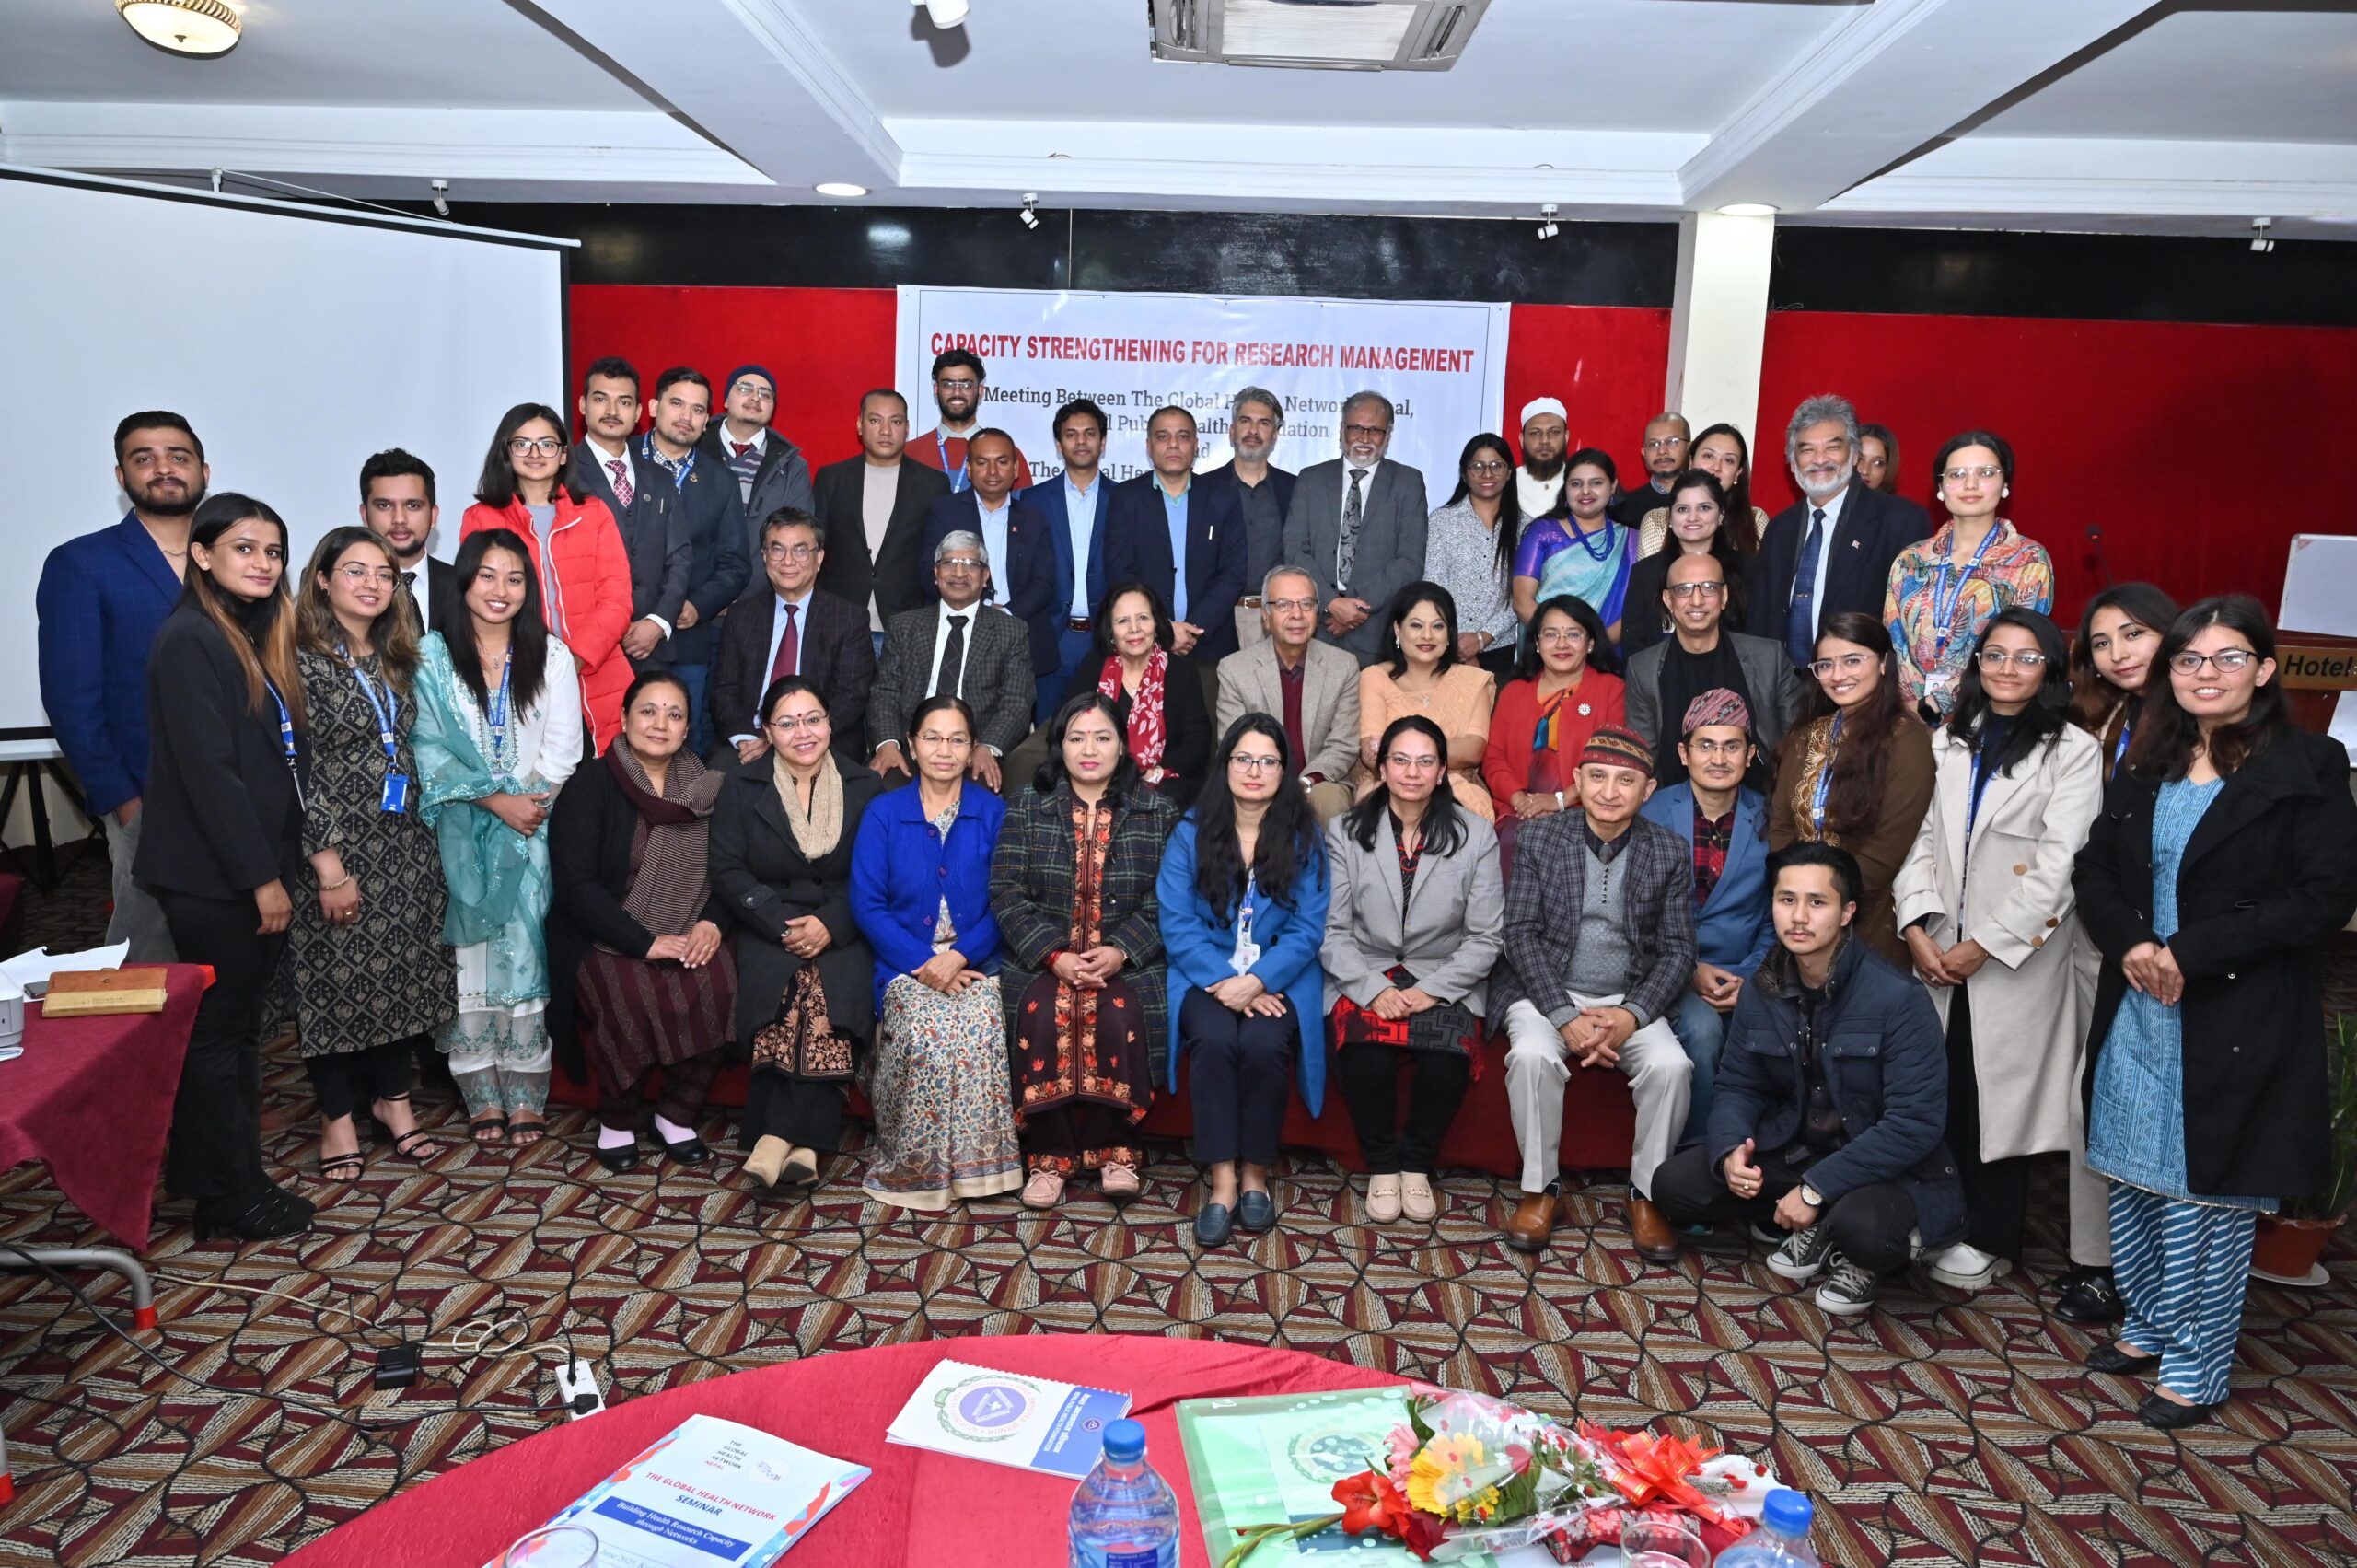 Capacity Strengthening For Research Management